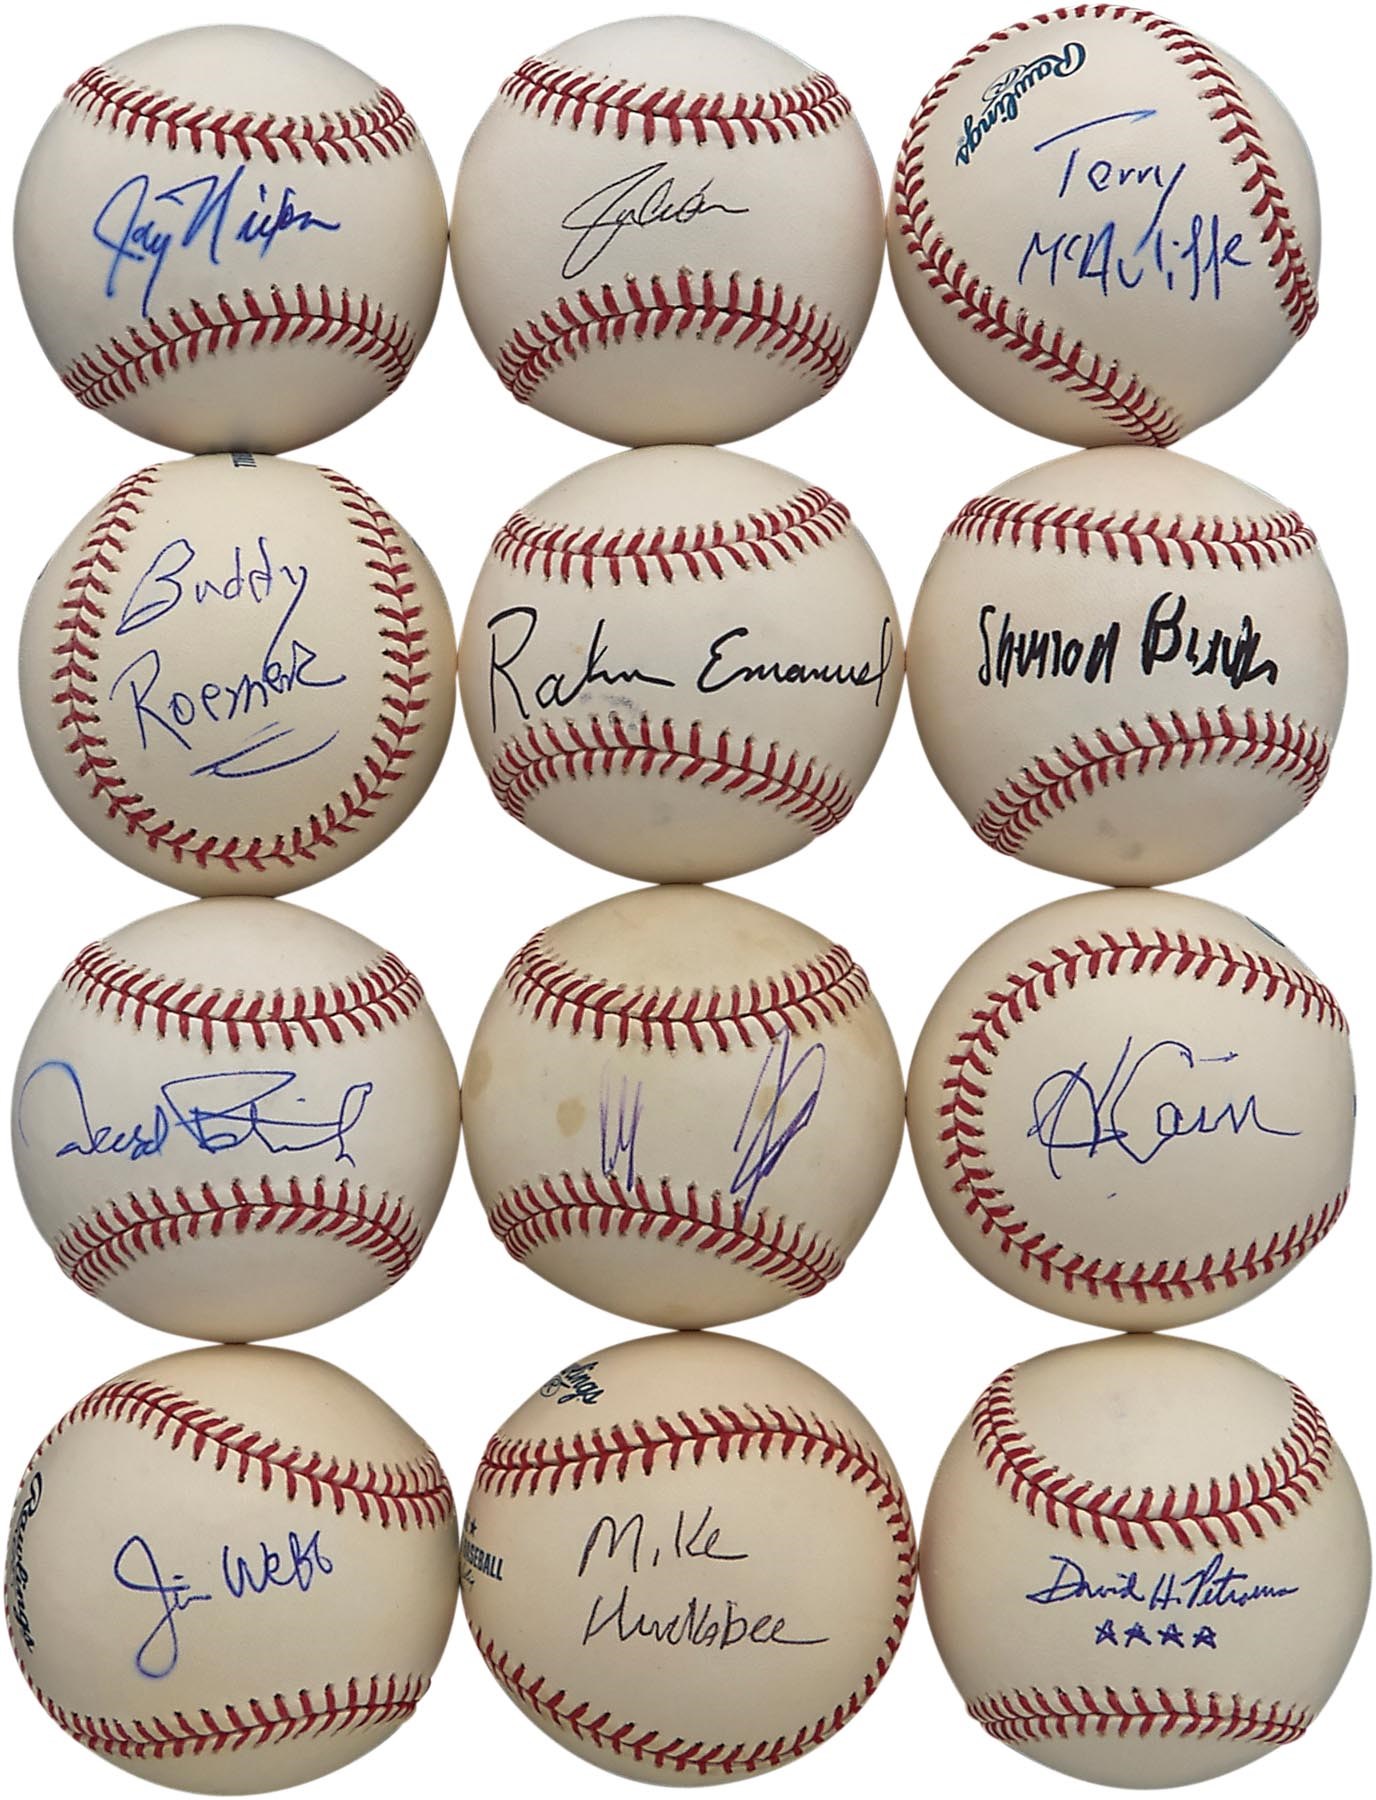 Heads of State & Major Political Figures Signed Baseballs From The Legendary Kaplan Collection (78)